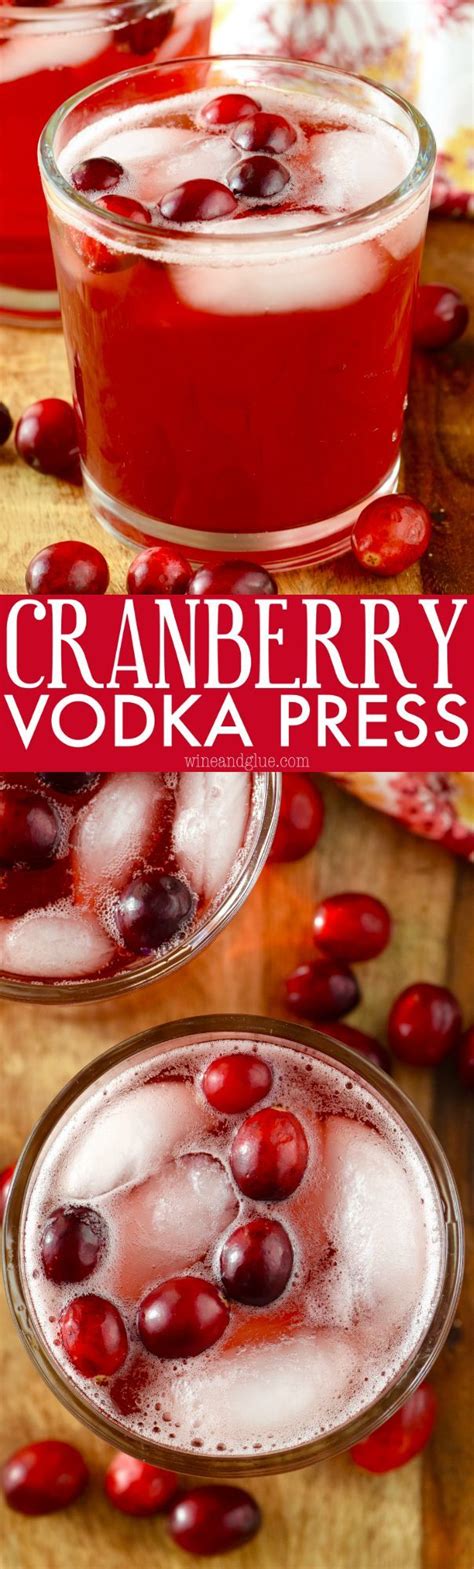 Our favorite is the simply lemonade brand. This Cranberry Vodka Press is the perfect light holiday ...